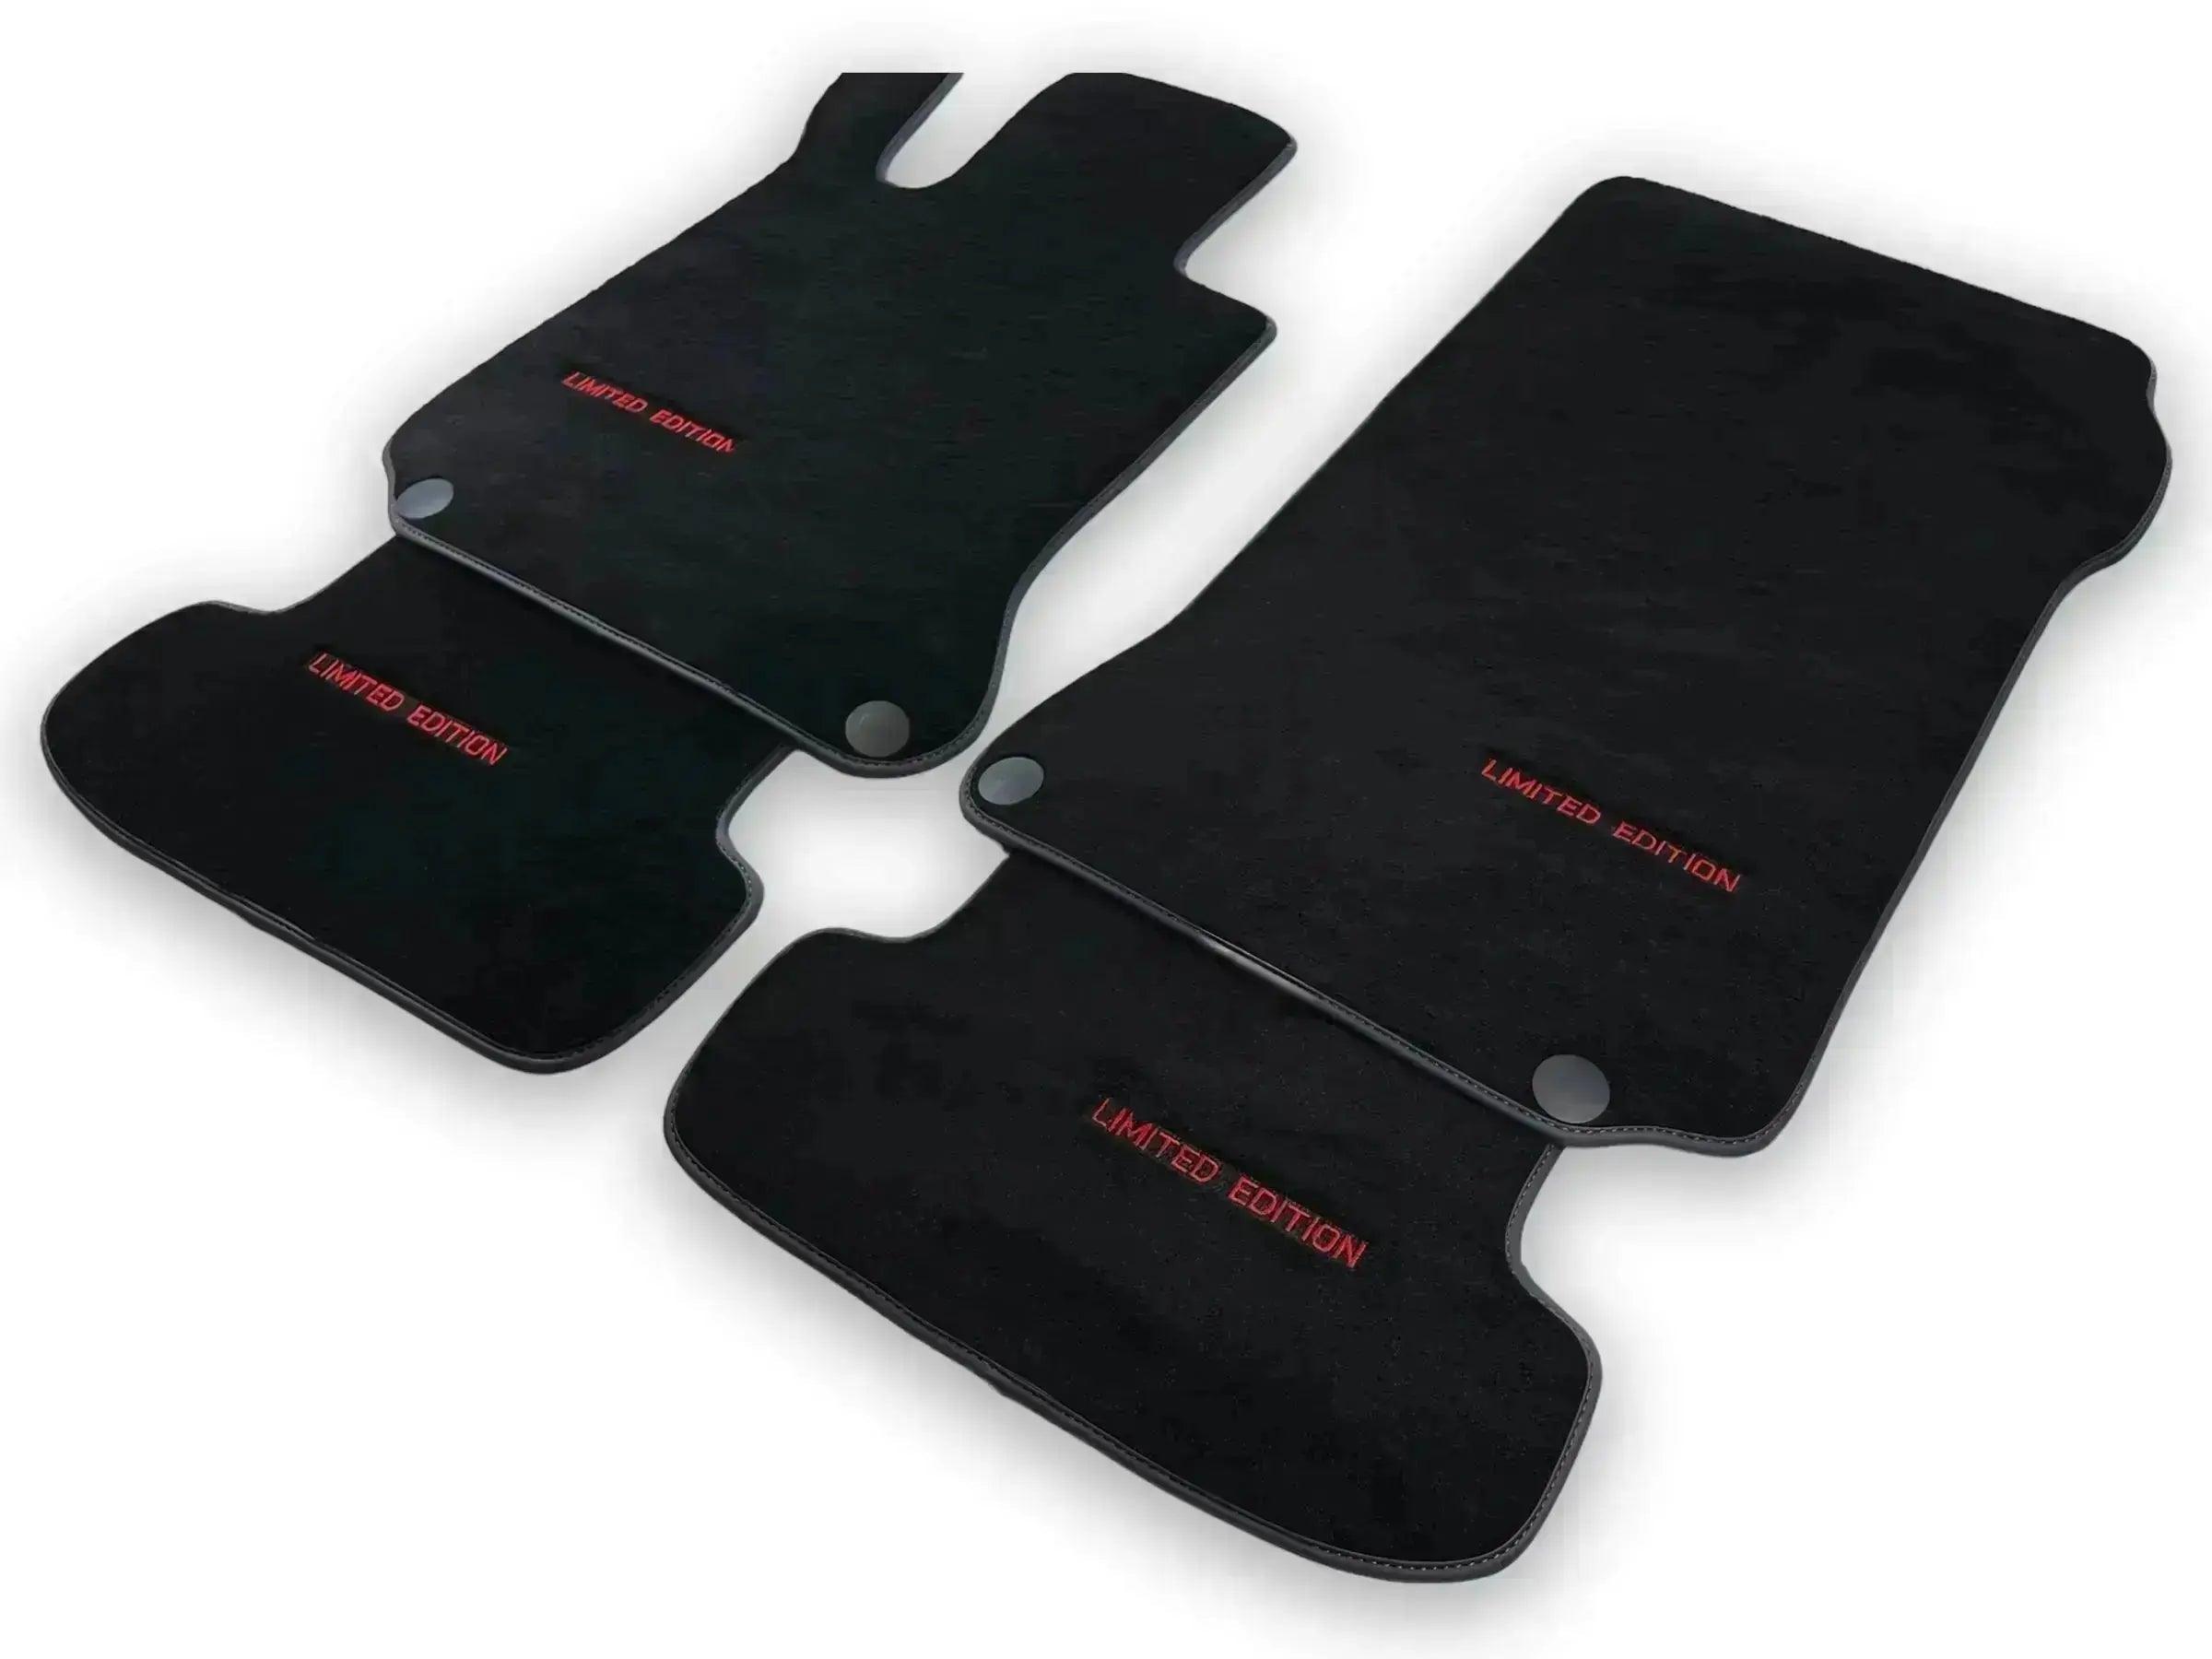 Gray Floor Mats For Mercedes Benz GLE-Class W166 Allrounder (2015-2019) | Limited Edition